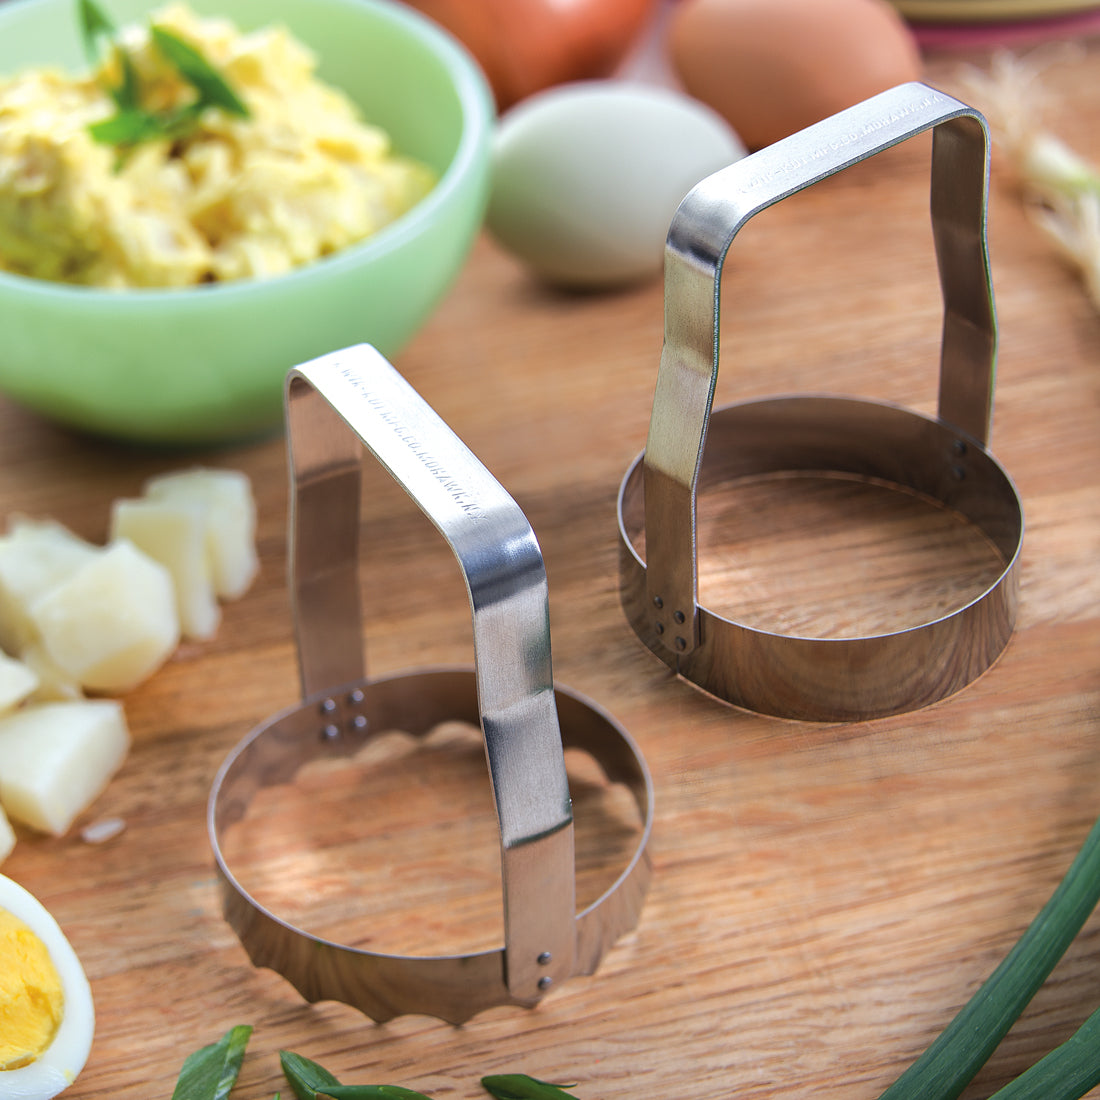 A Plain and a Serrated Food Chopper next to a bowl of egg salad.